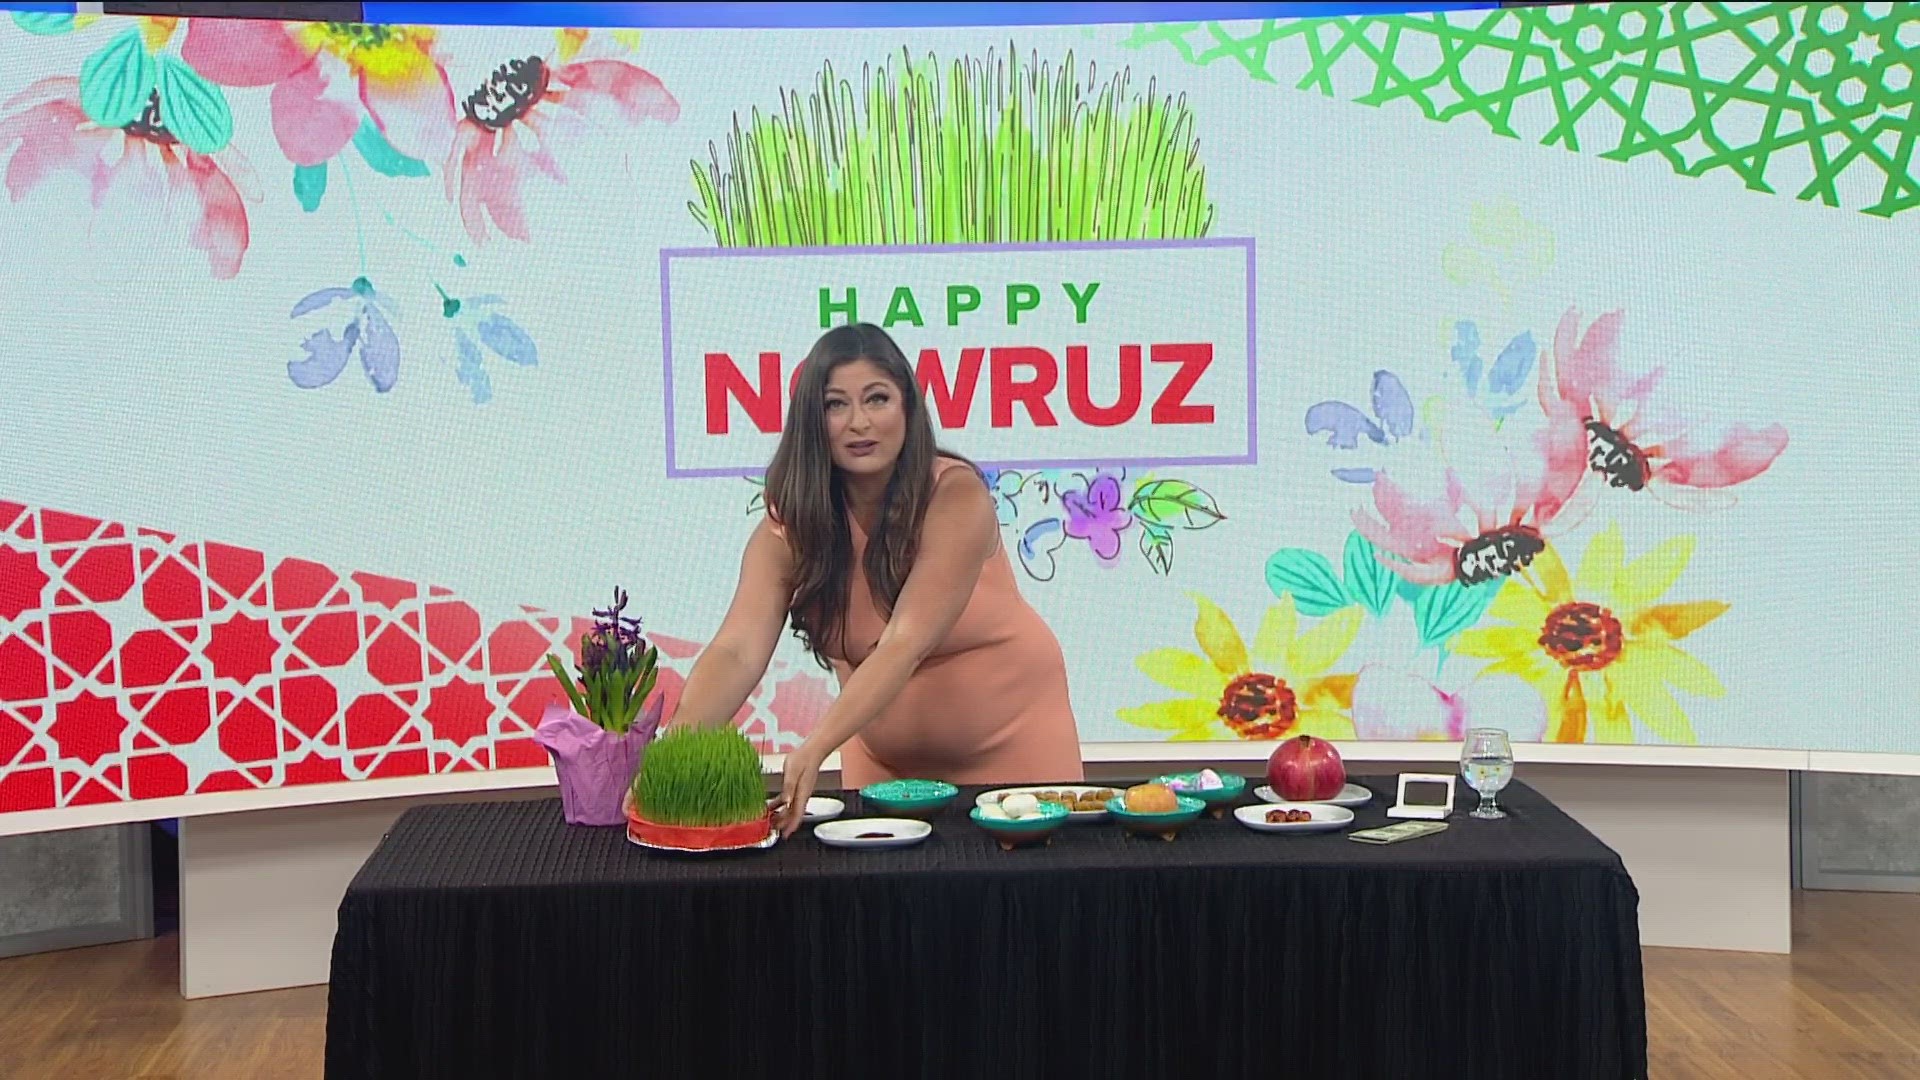 CBS 8's Neda Iranpour explains how Persians celebrate Nowruz also known as the New Year. The celebration involves gathering around a table known as a Haftseen.